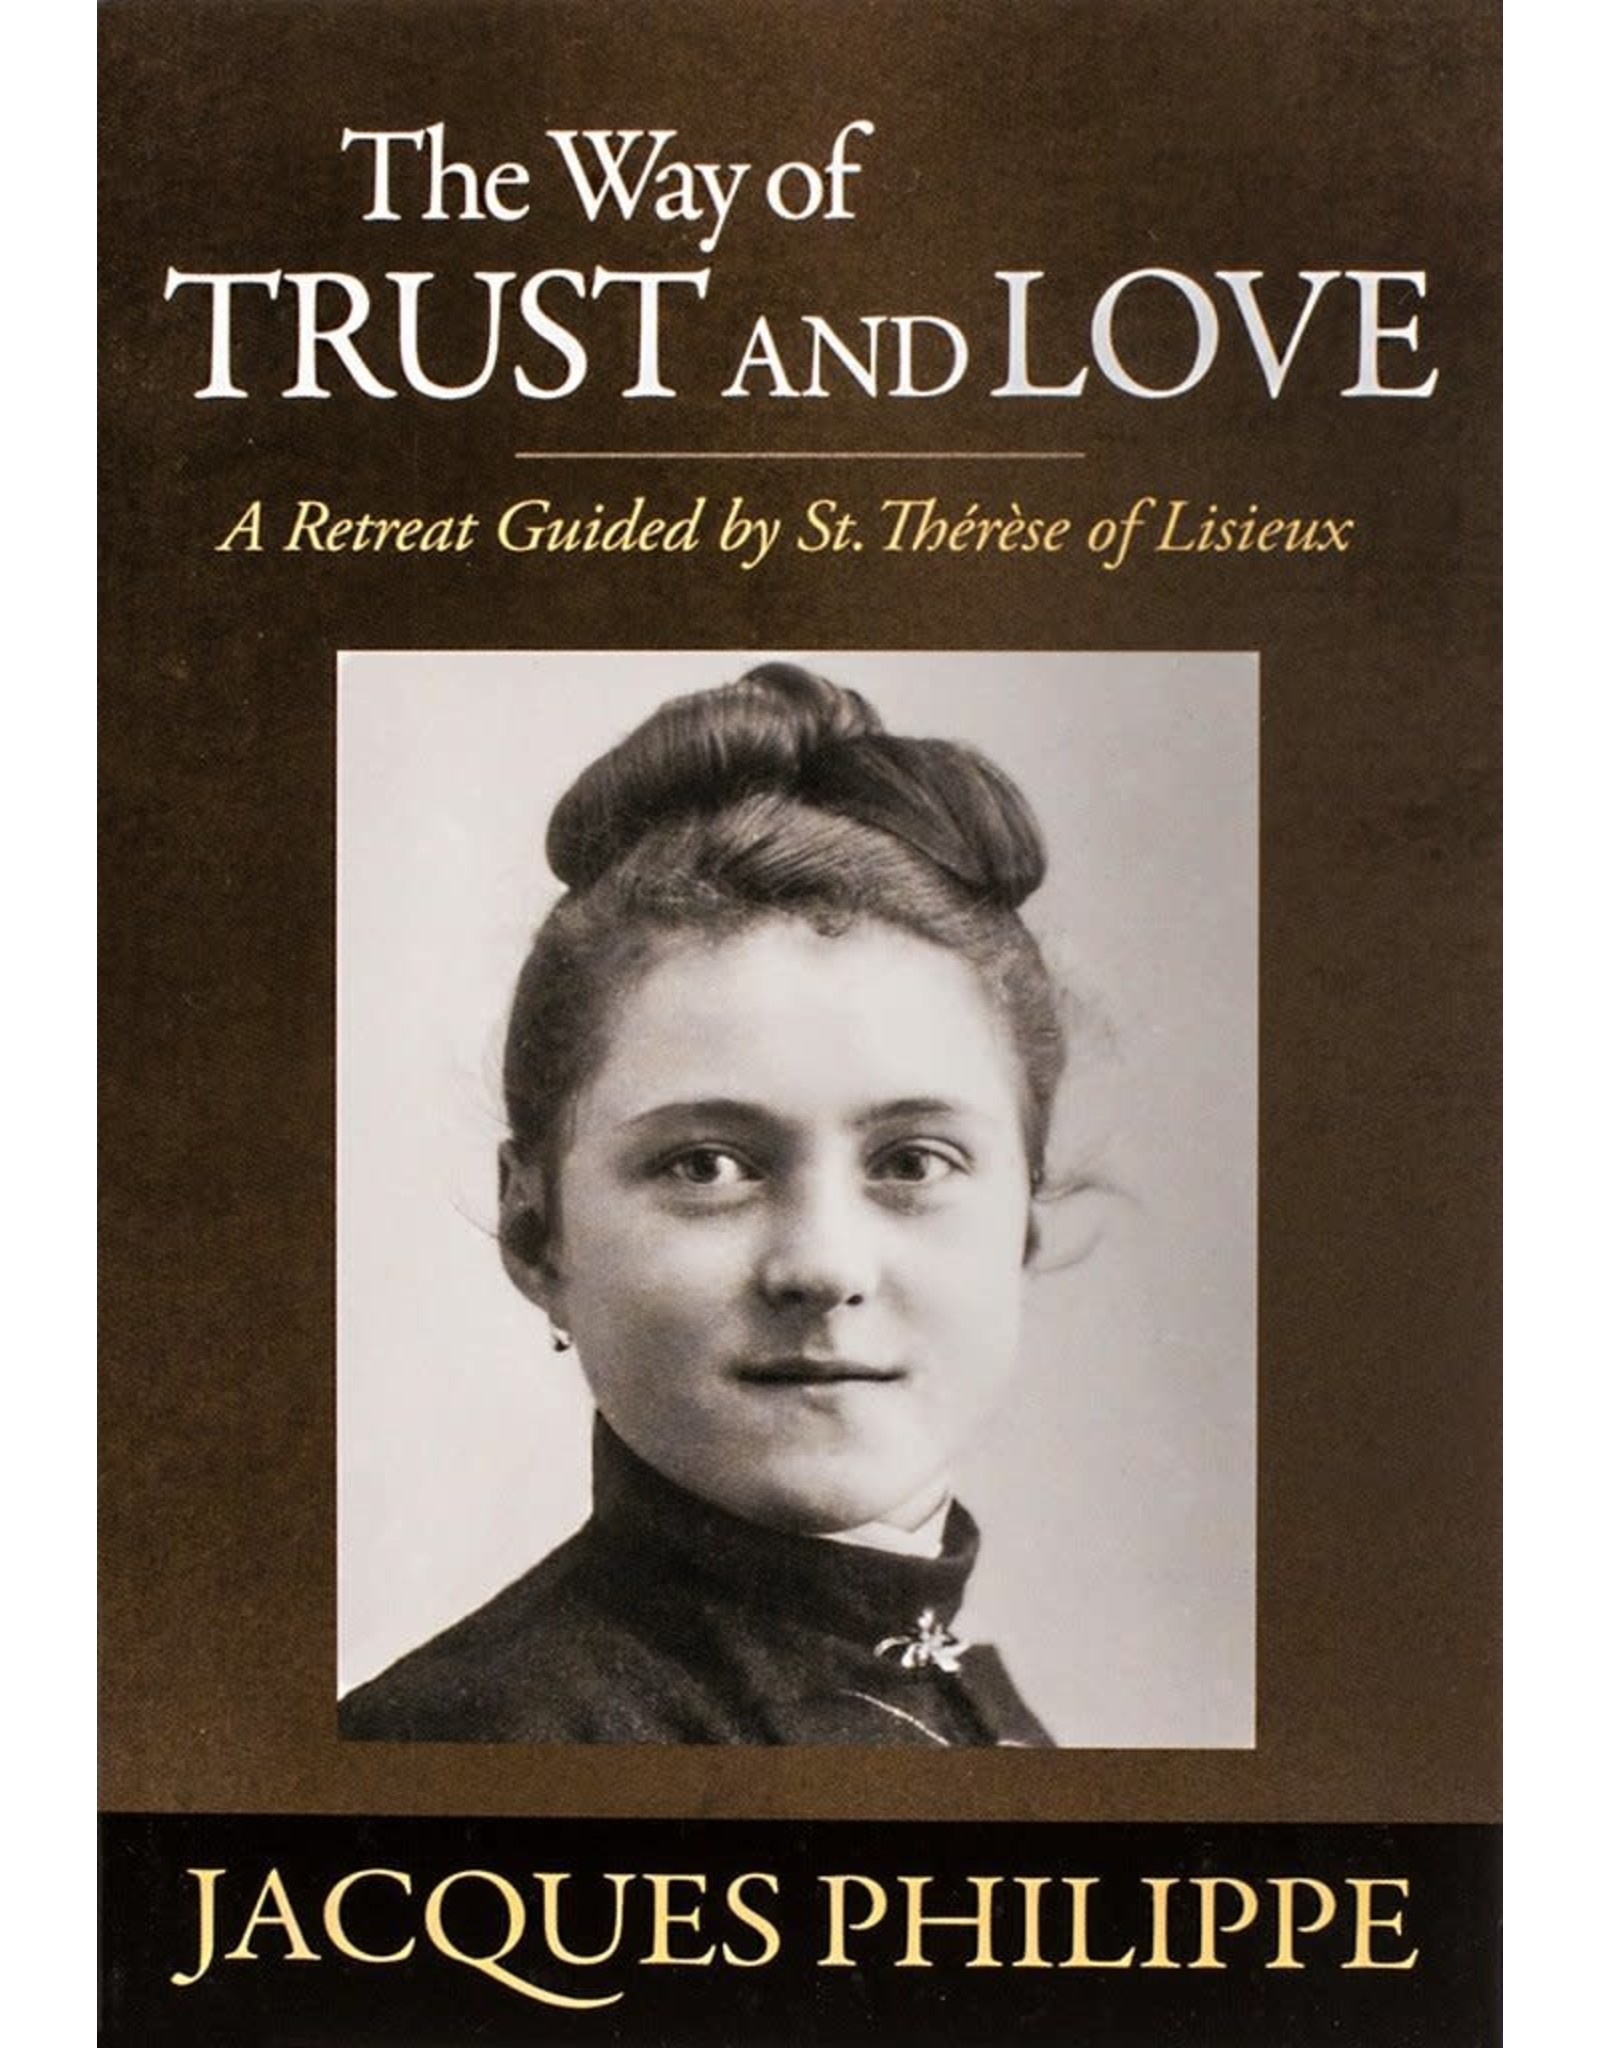 The Way of Trust and Love: A Retreat Guided by St. Therese of Lisieux